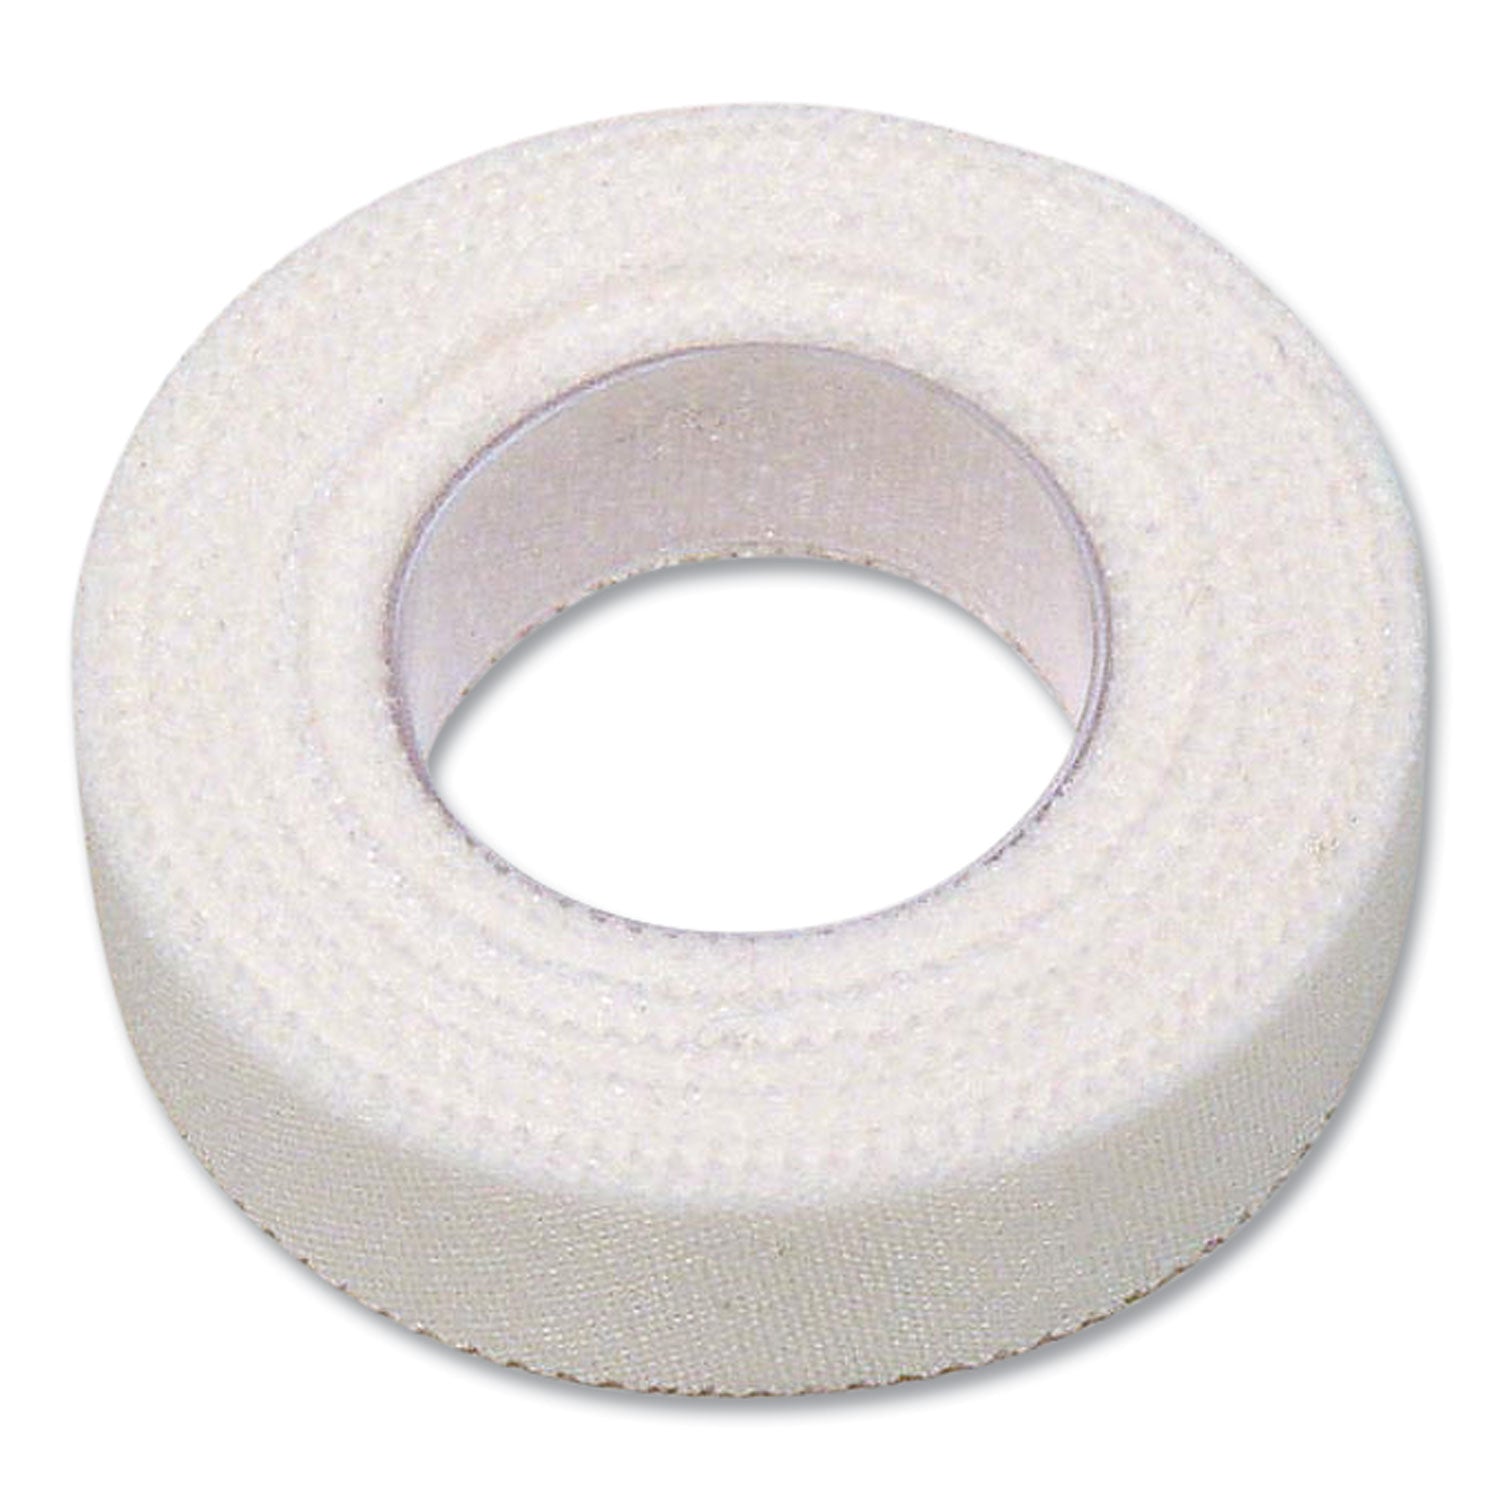 first-aid-adhesive-tape-05-x-10-yds-6-rolls-box_fao12302 - 1